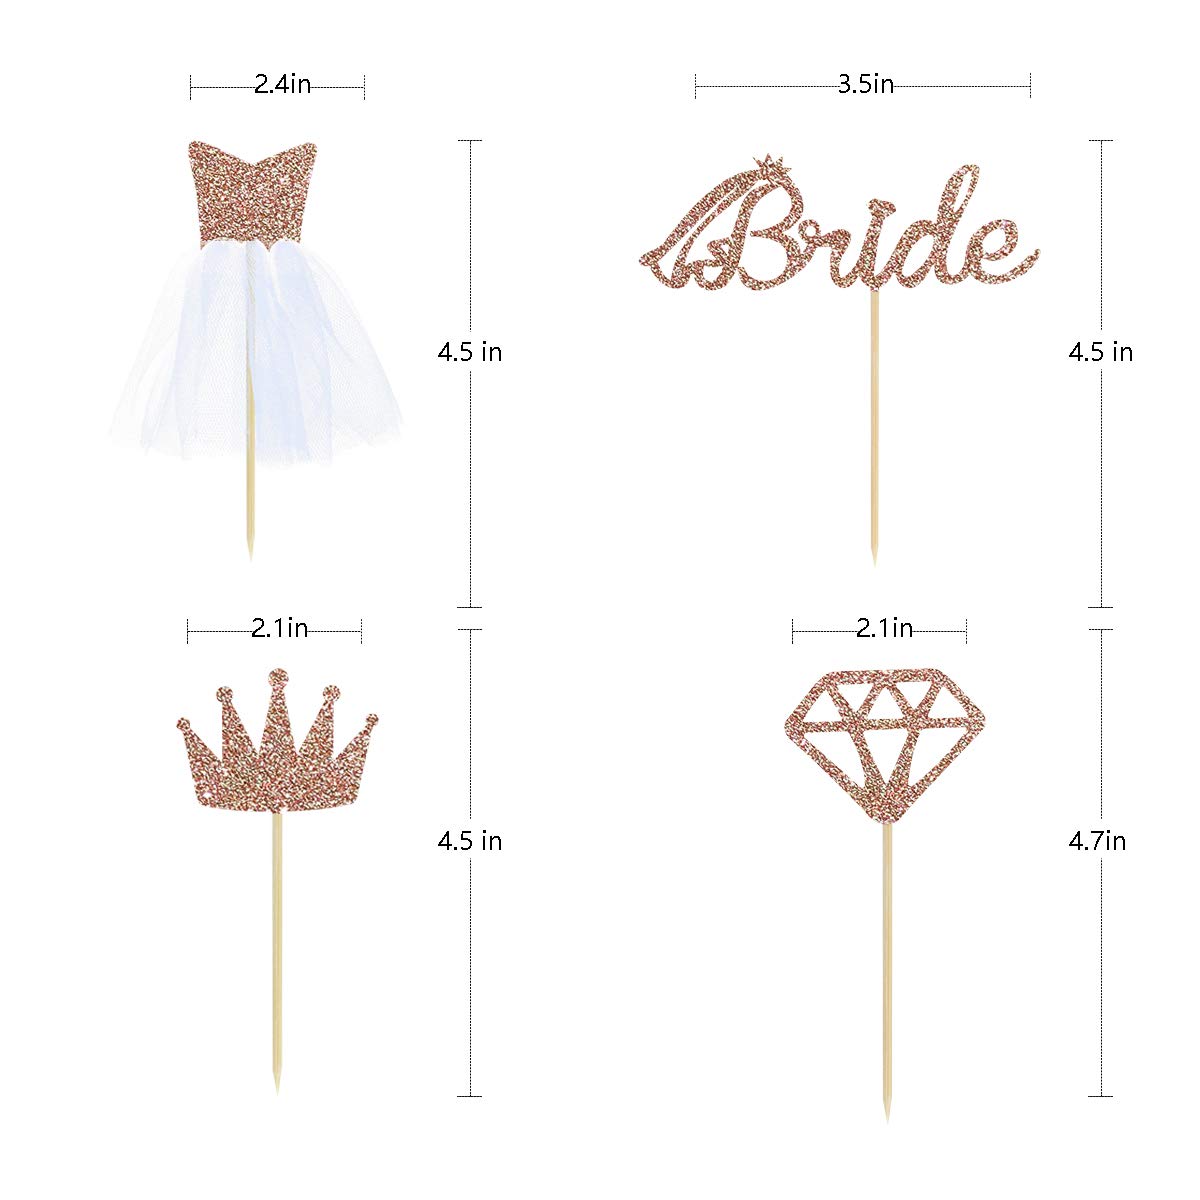 32 Rose Gold Glitter Bride To Be Cupcake Toppers with Diamond,Crown,Bride,3D Tulle Dress Cupcake Toppers for Bridal Shower Supplies, Wedding Engagement, Bachelorette Party Decorations